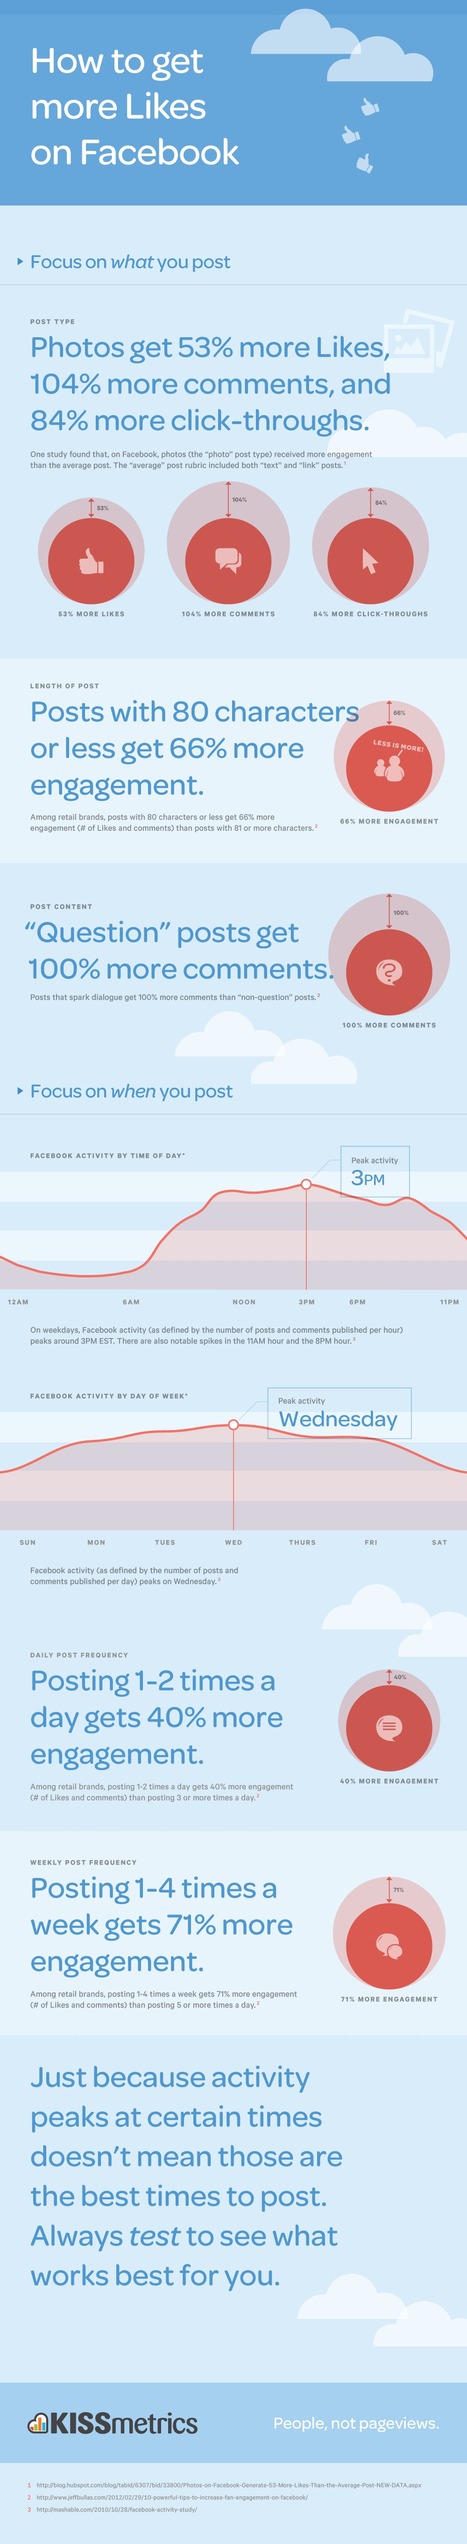 How to Get More Likes on Facebook - Infographic - KISSmetrics | The MarTech Digest | Scoop.it